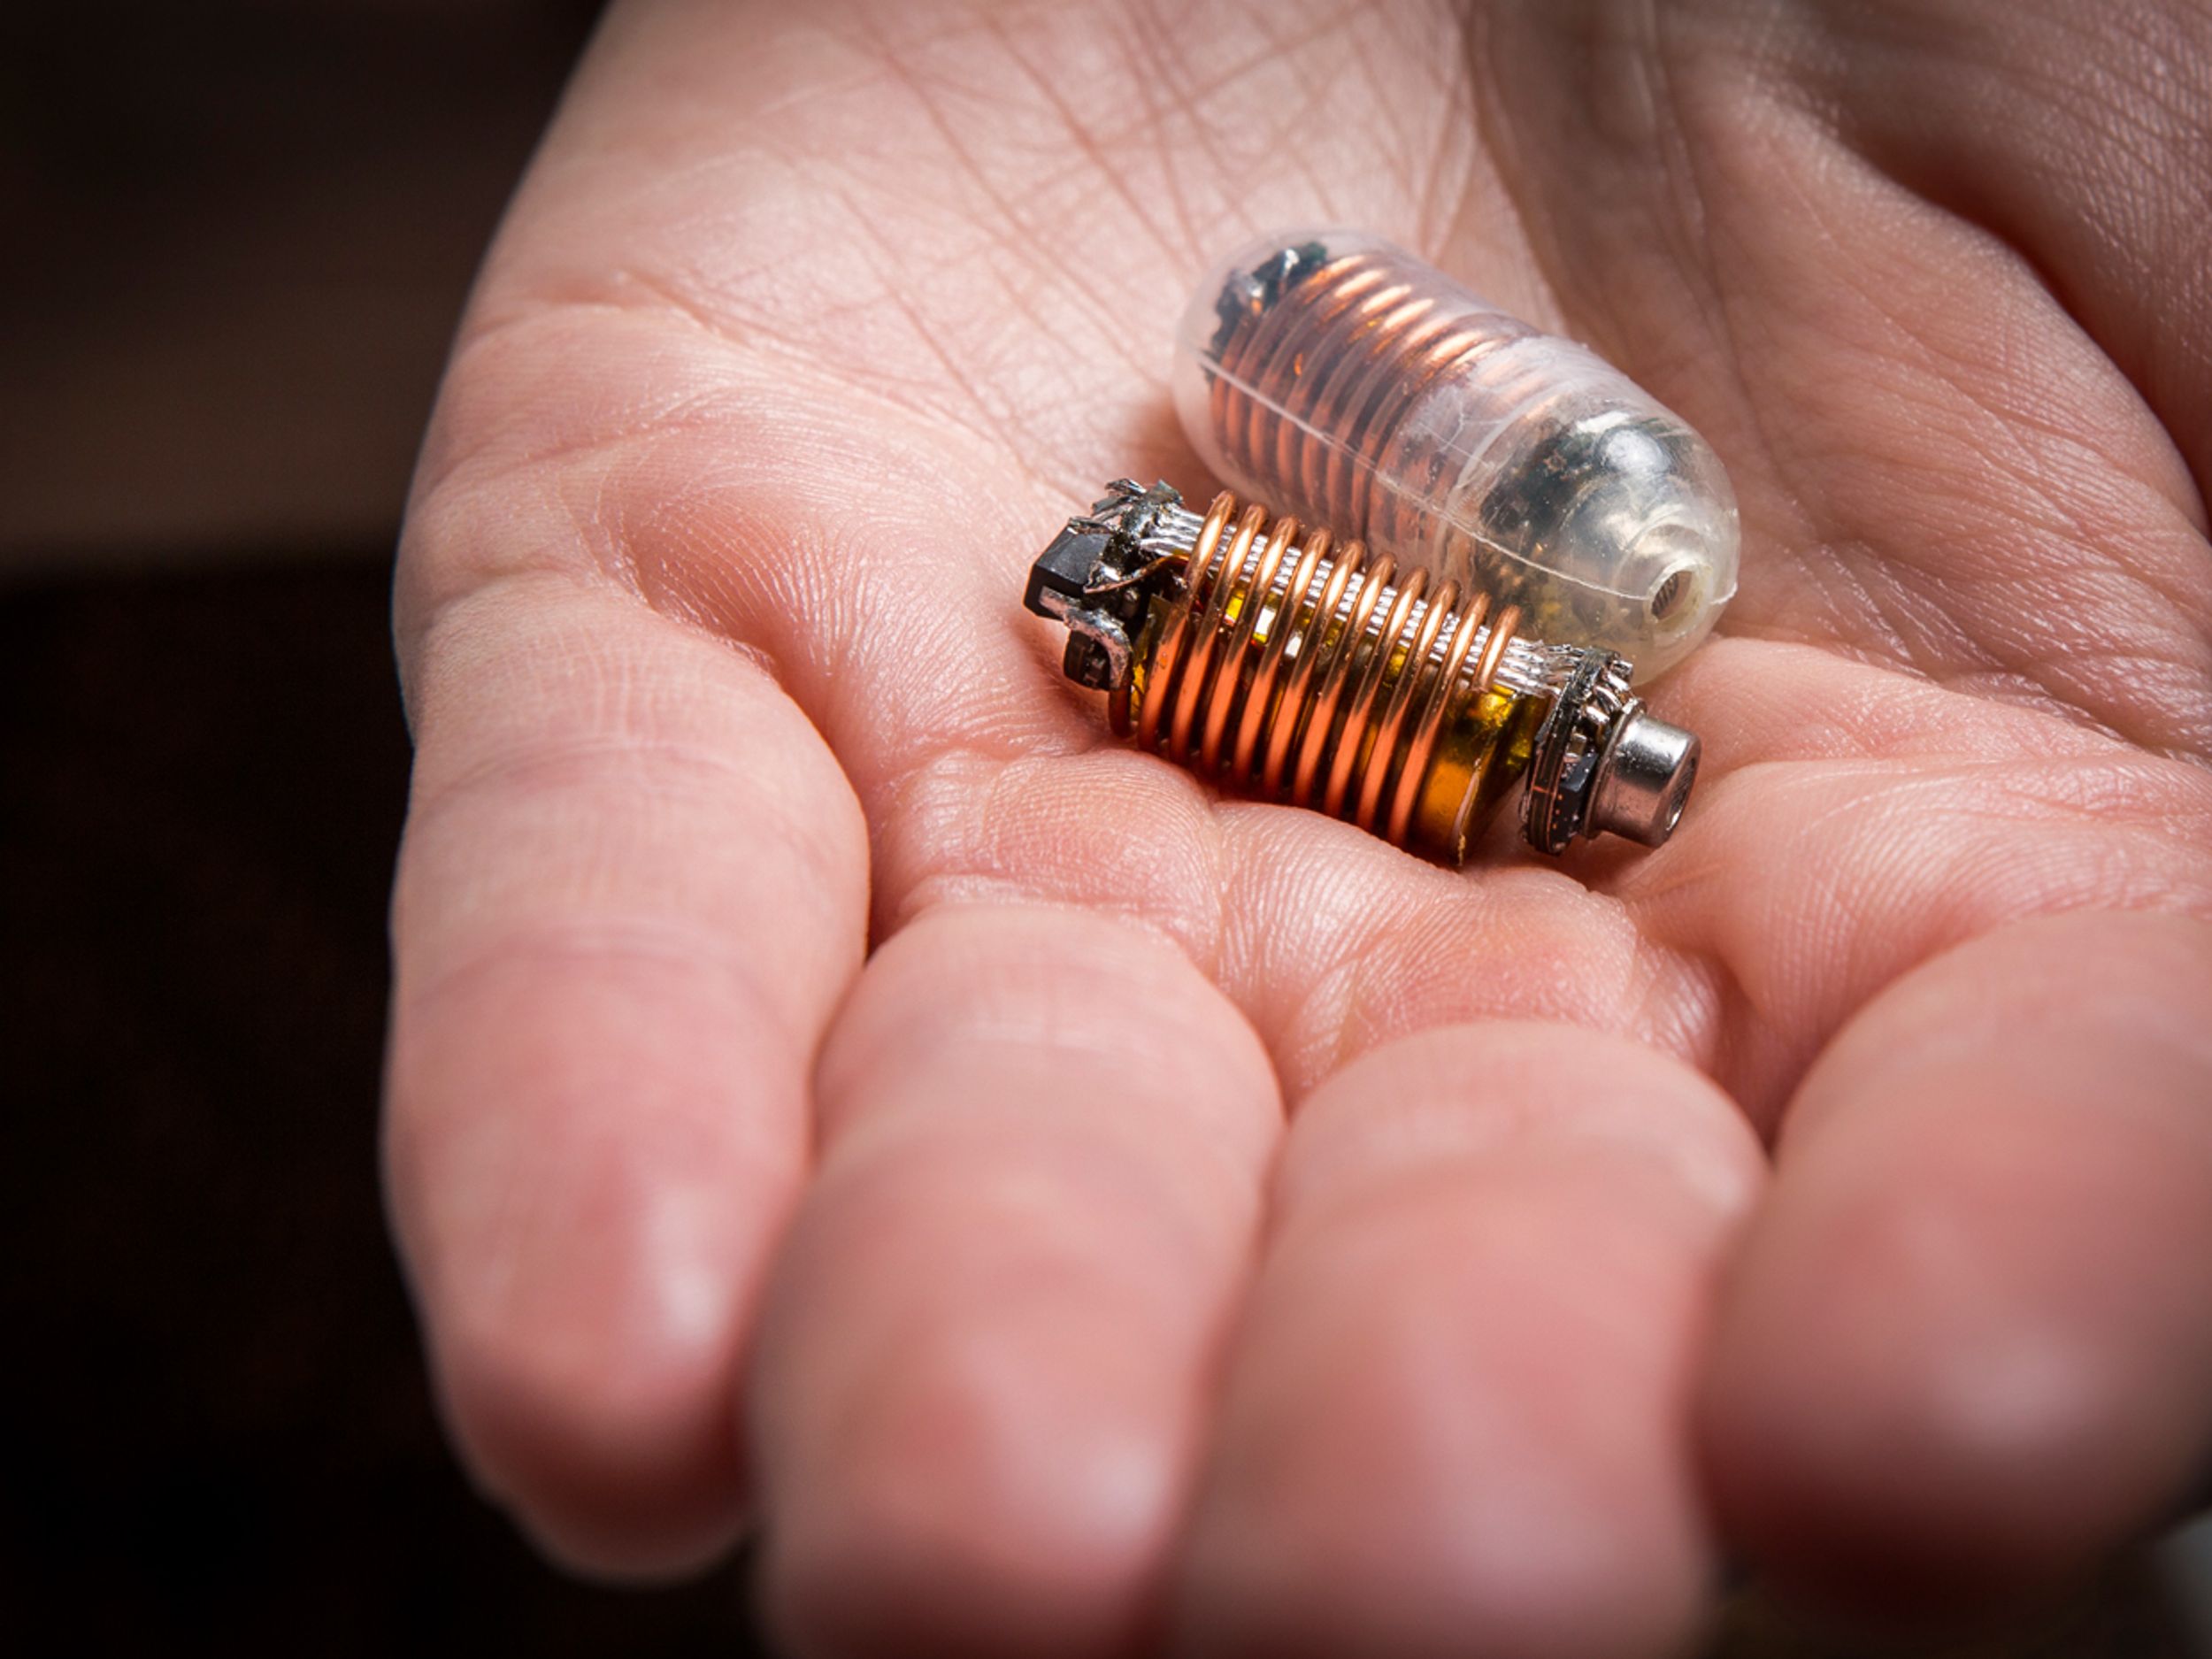 A close-up photo shows someone holding the gas pill in their hand.